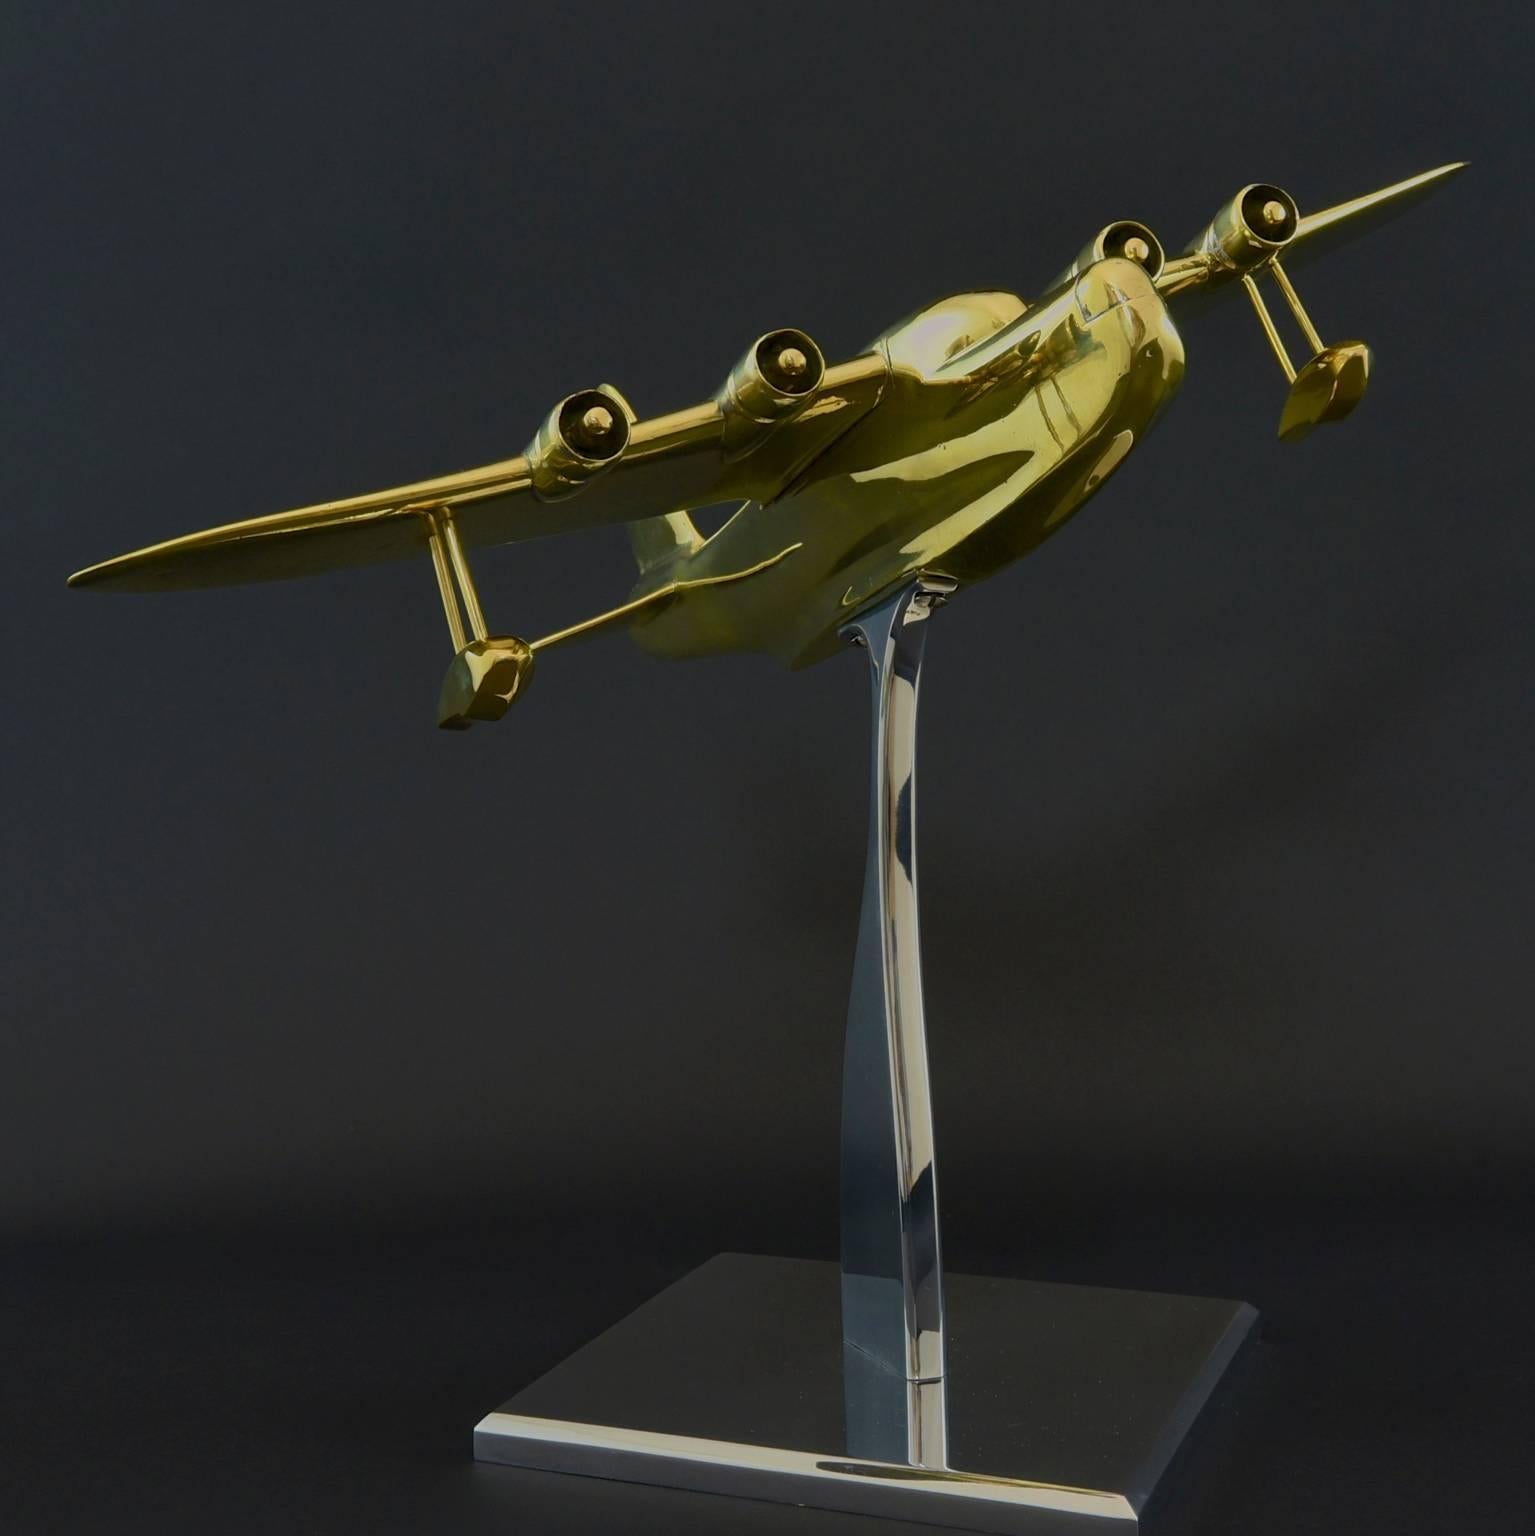 Amazing solid cast brass model of a Short Brothers Sunderland flying boat patrol bomber, circa 1940 on newly made aluminium stand.

One of the most outstanding British seaplanes ever built, the Sunderland was one of the most powerful and widely used